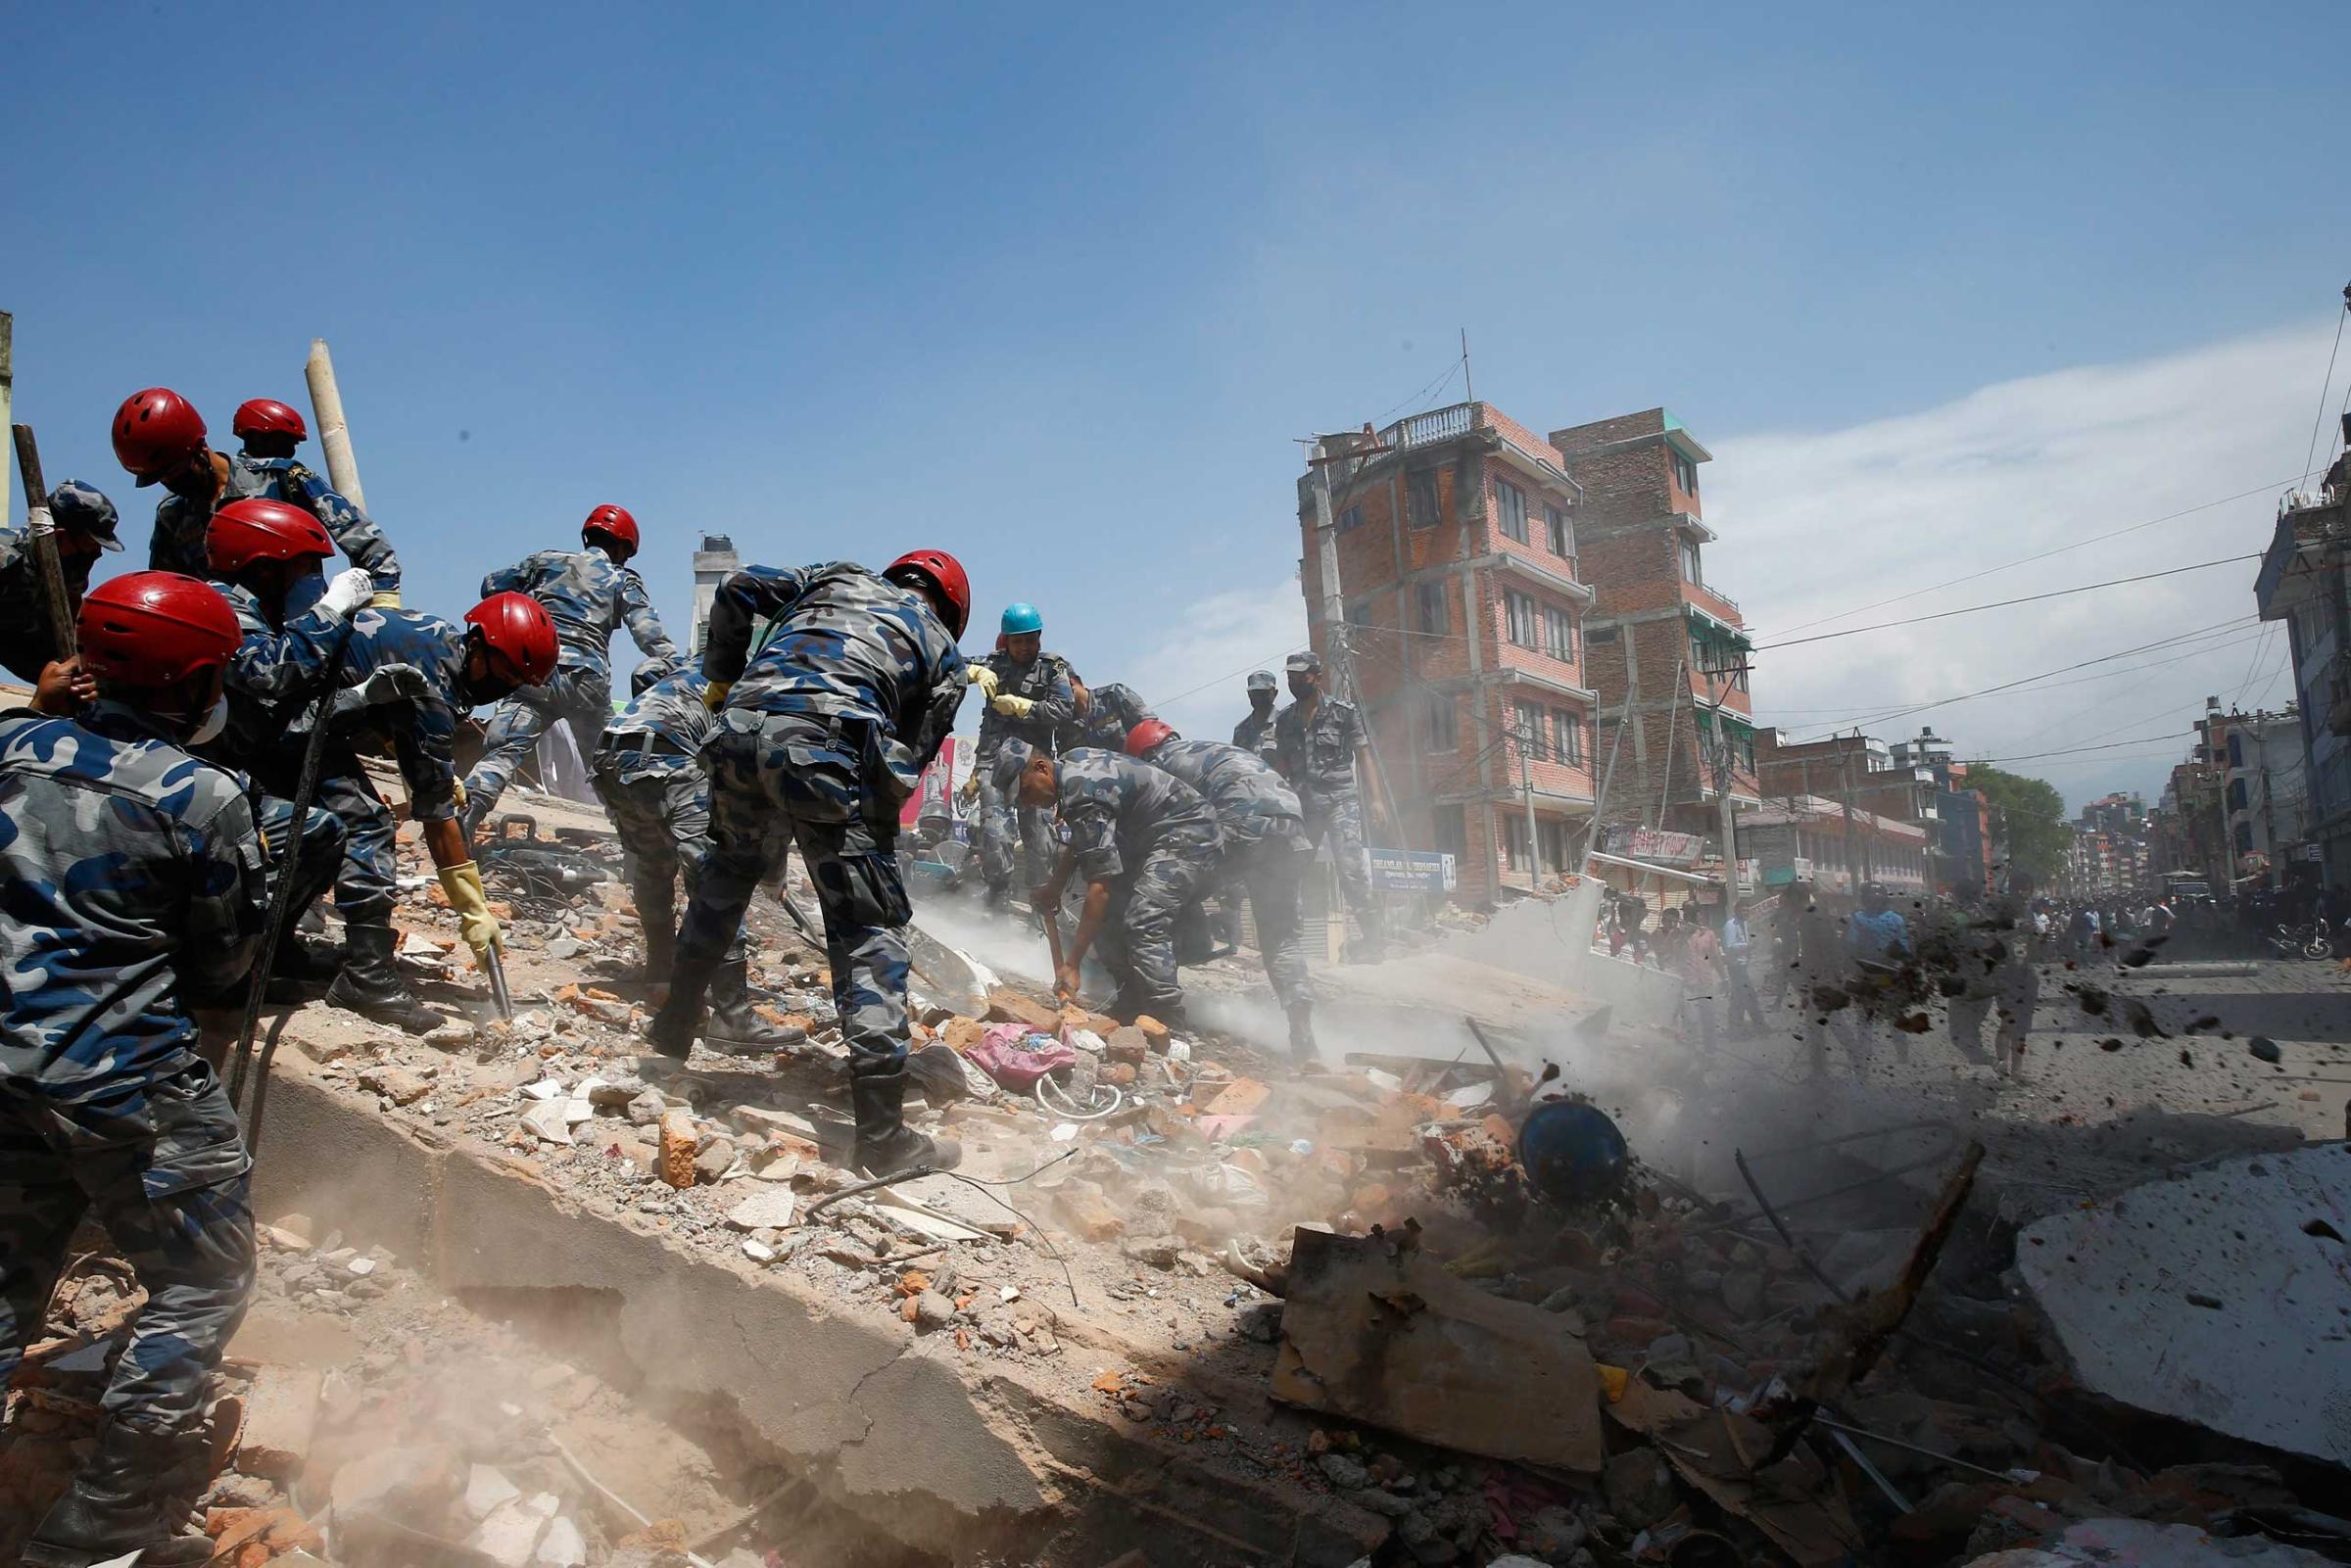 Nepalese armed police force search for victims after a house collapsed in strong earthquake hits Kathmandu on May 12 2015.